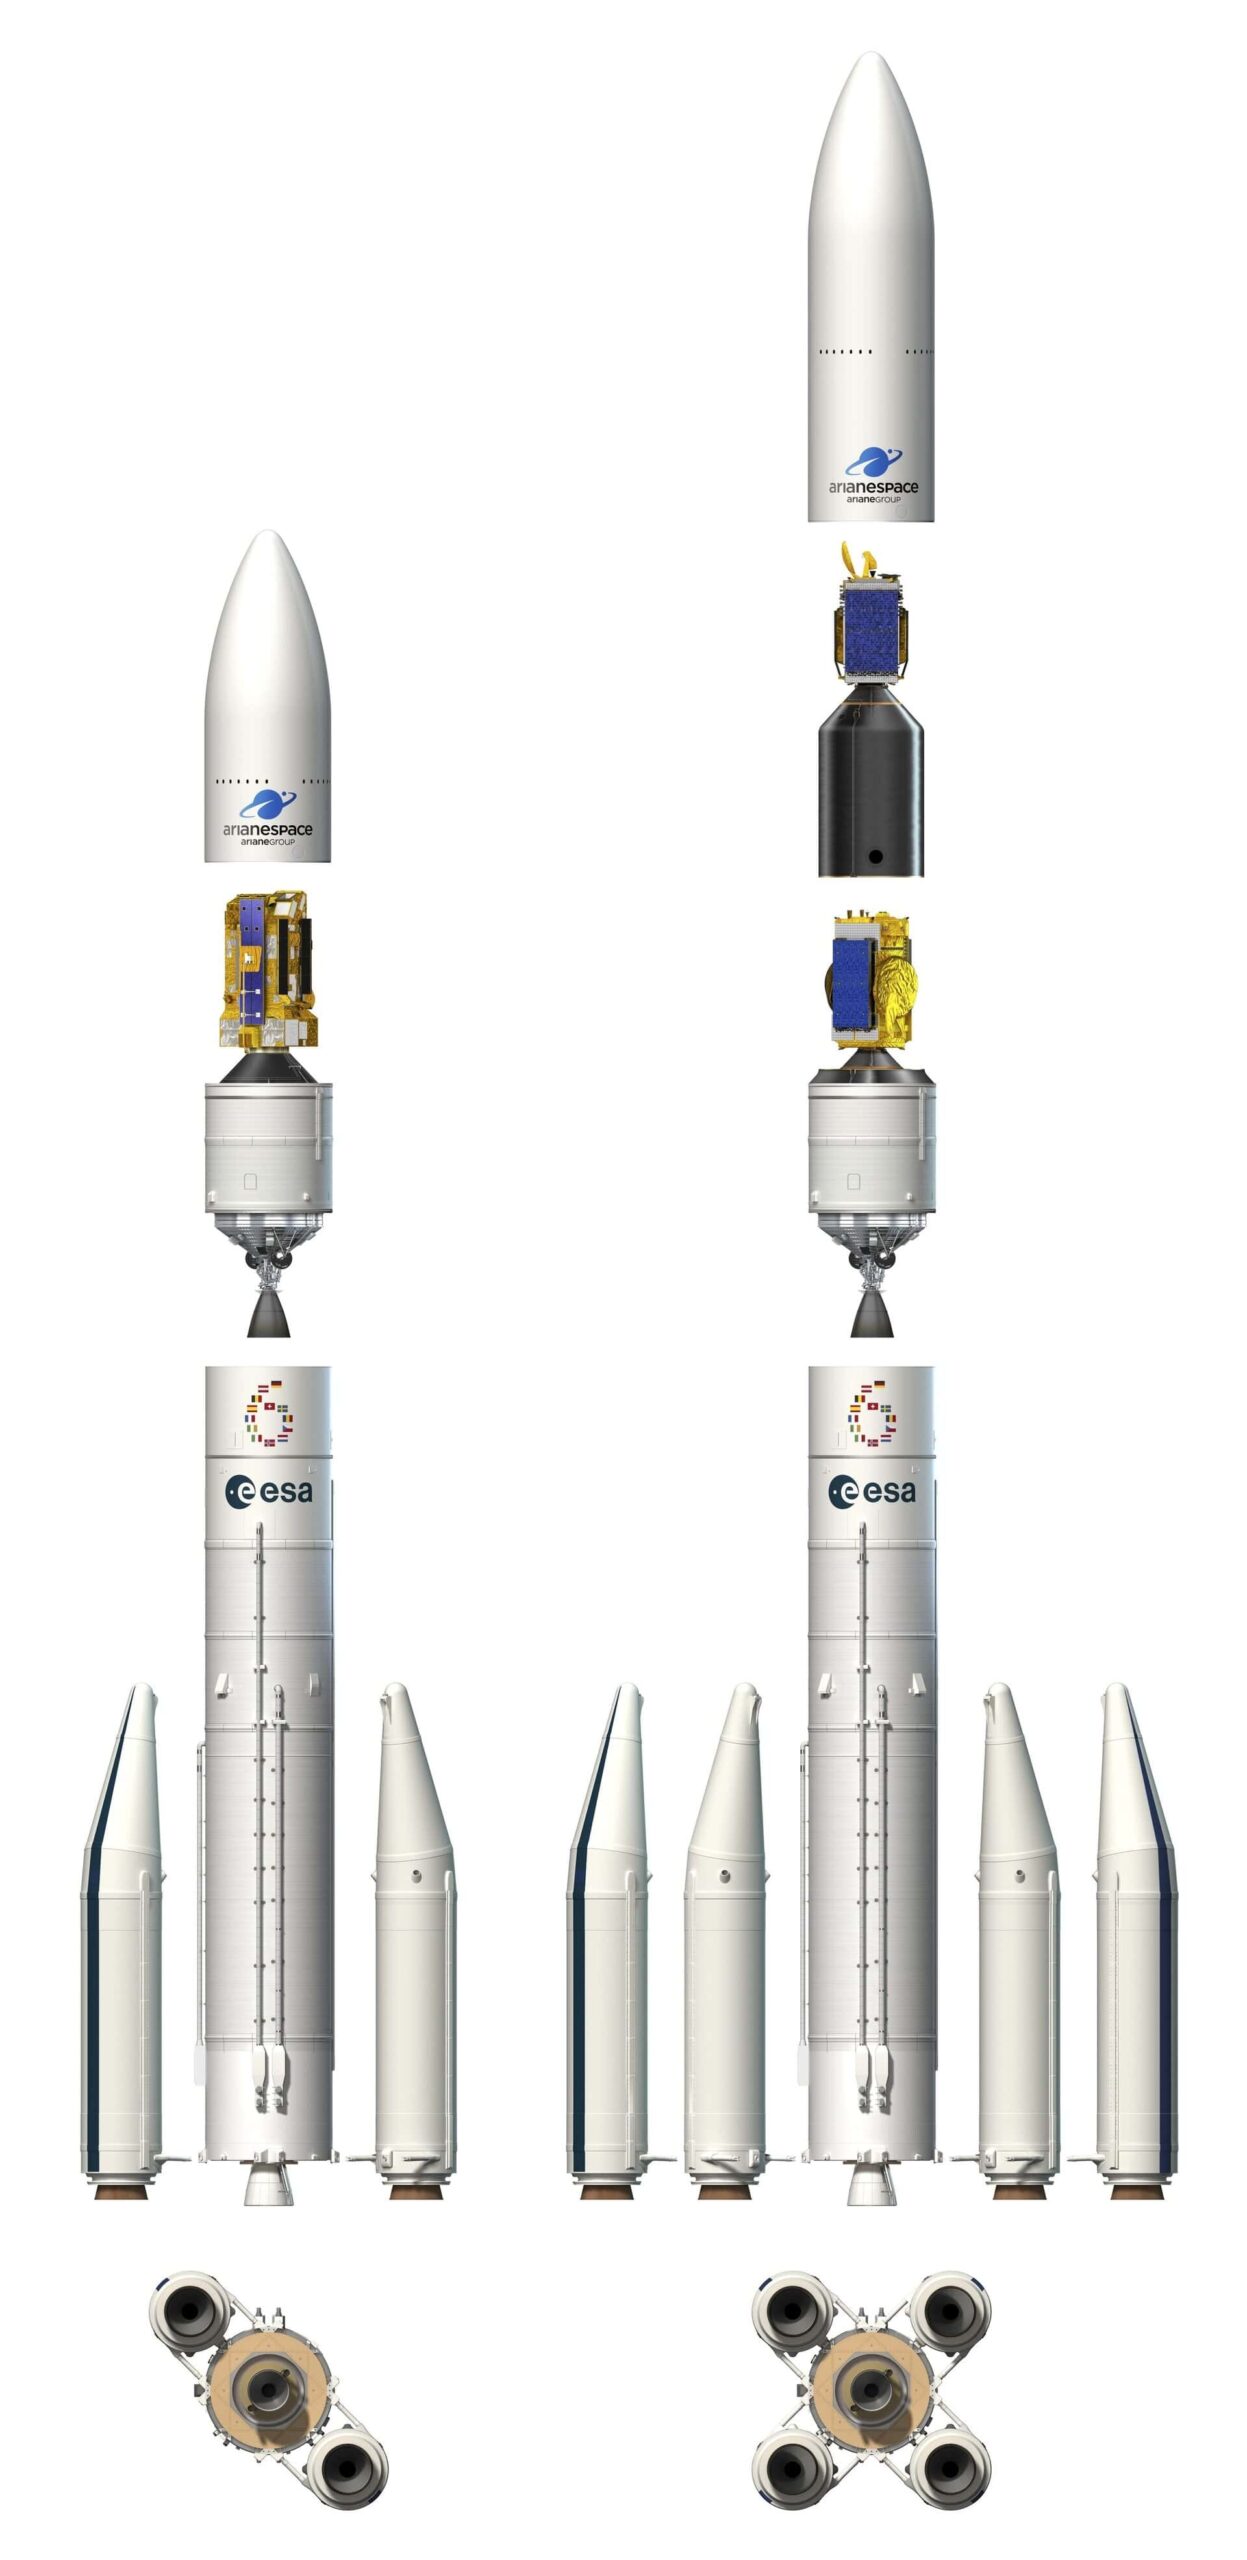 The components of the Ariane 6 rocket, with its two variants